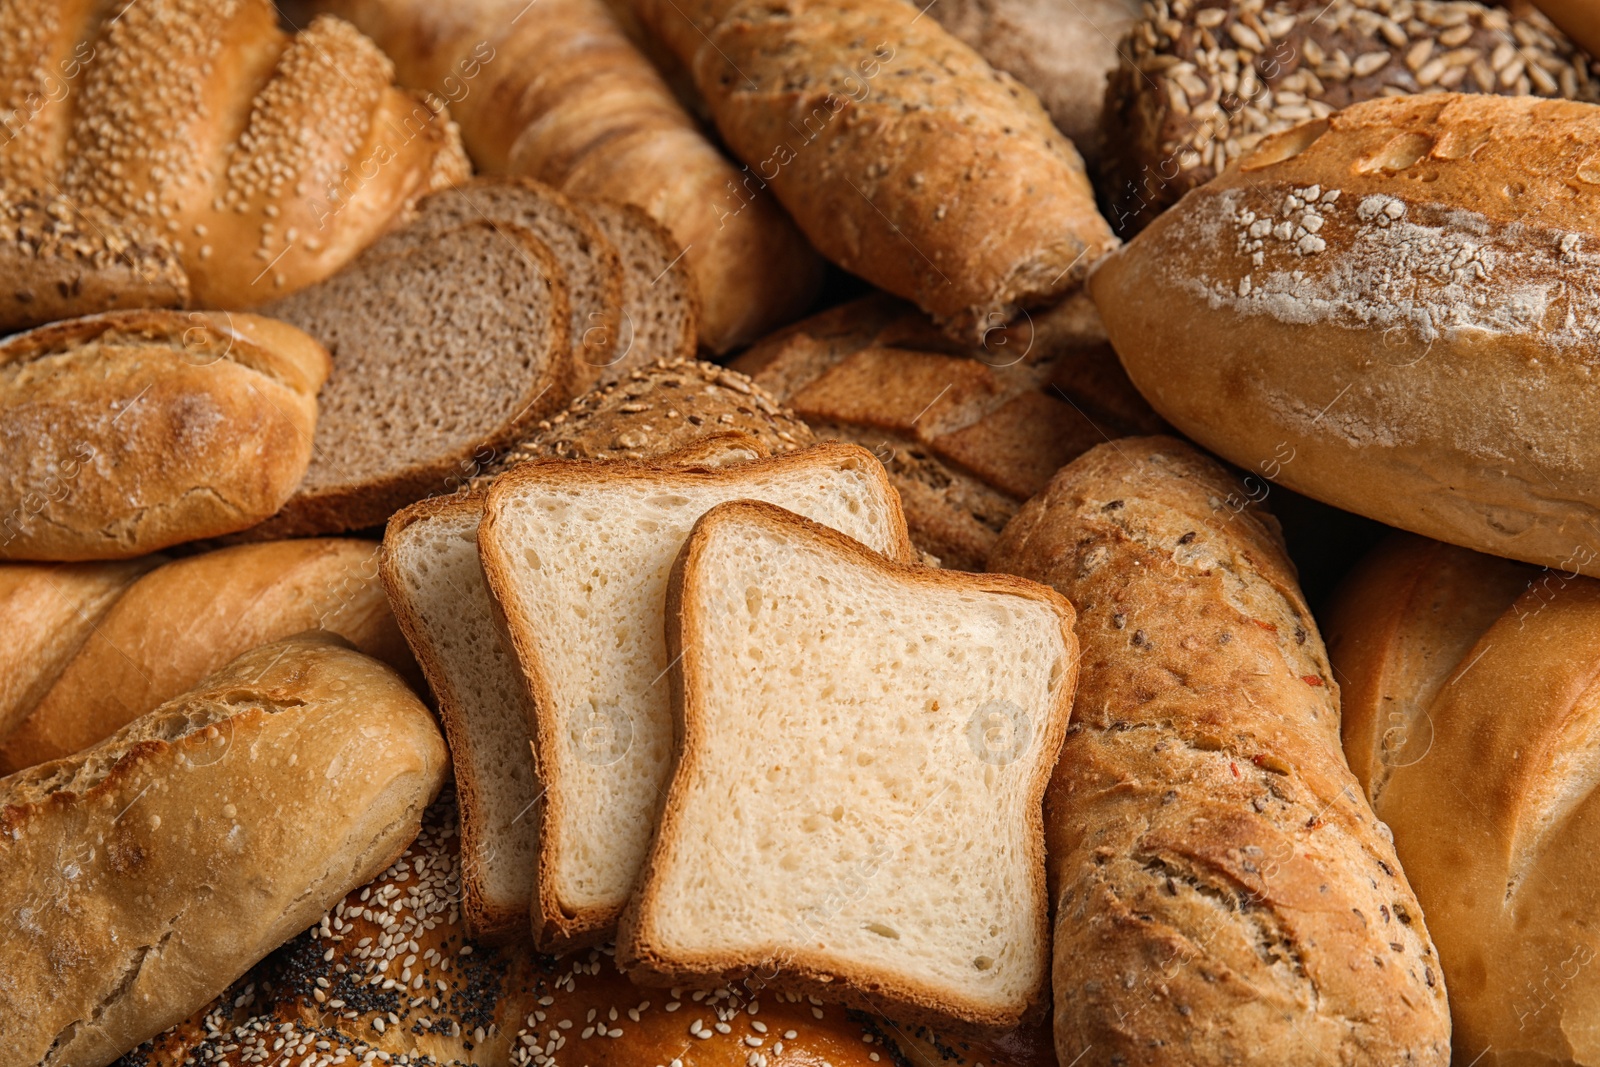 Photo of Different kinds of fresh bread as background, closeup